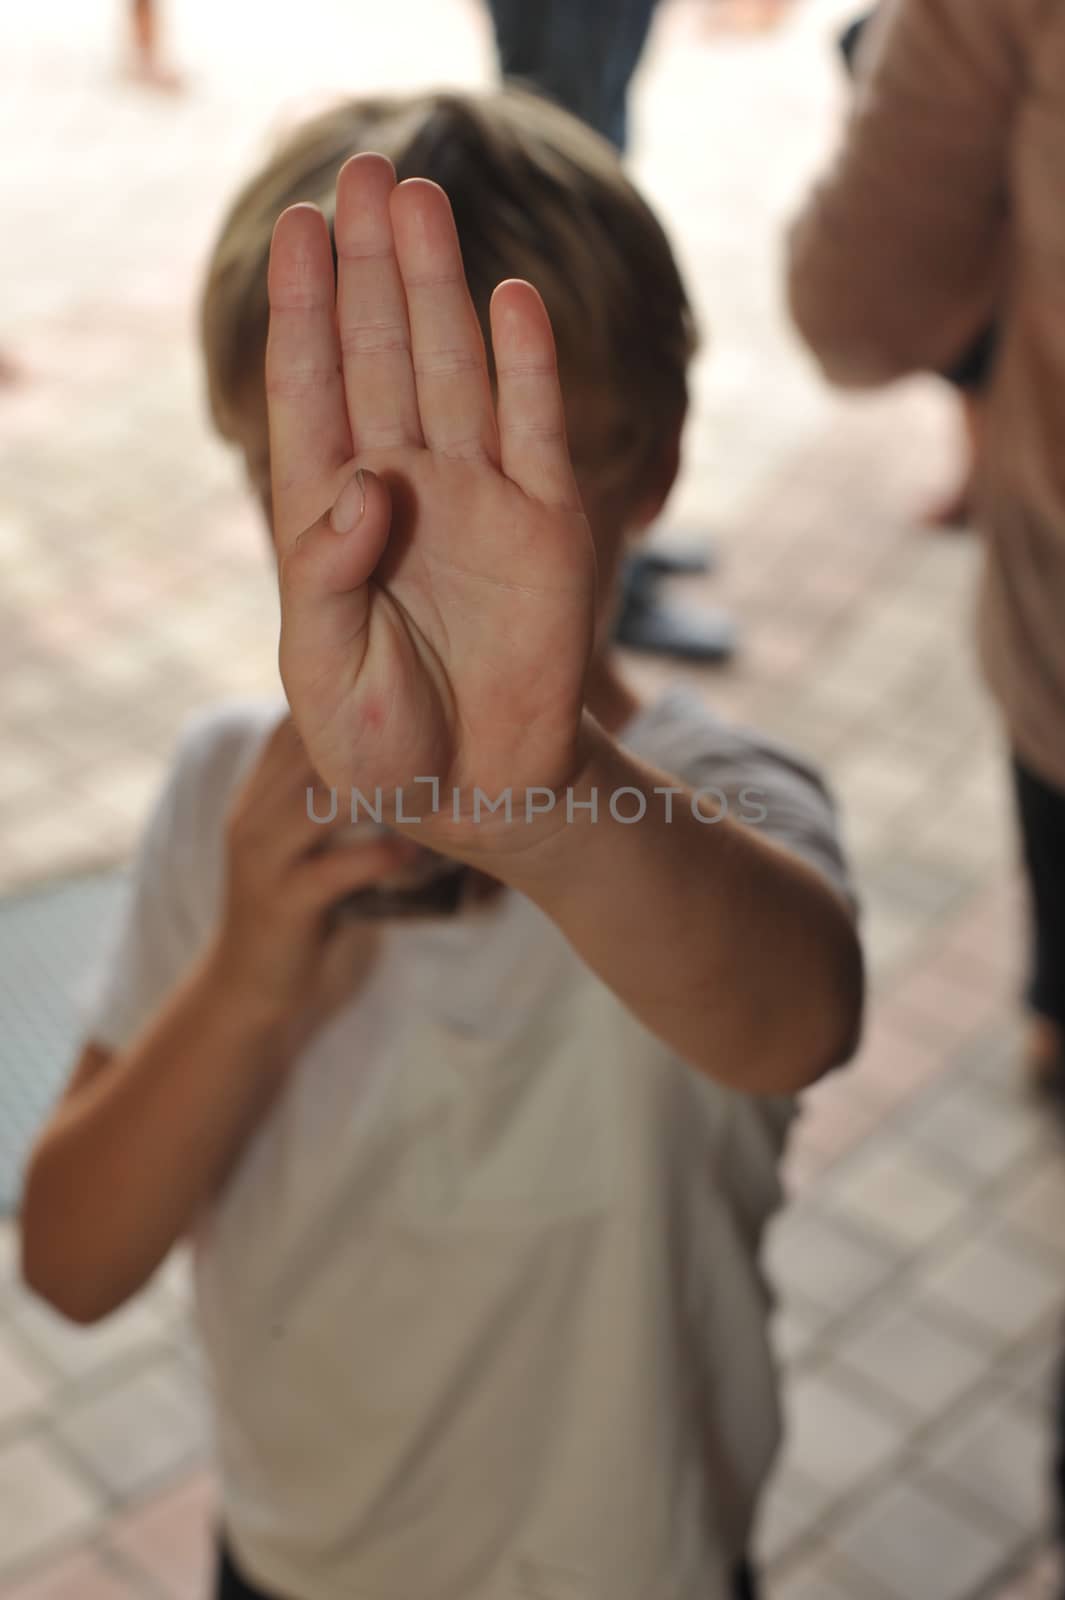 Boy Saying Stop With His Hand by seawaters